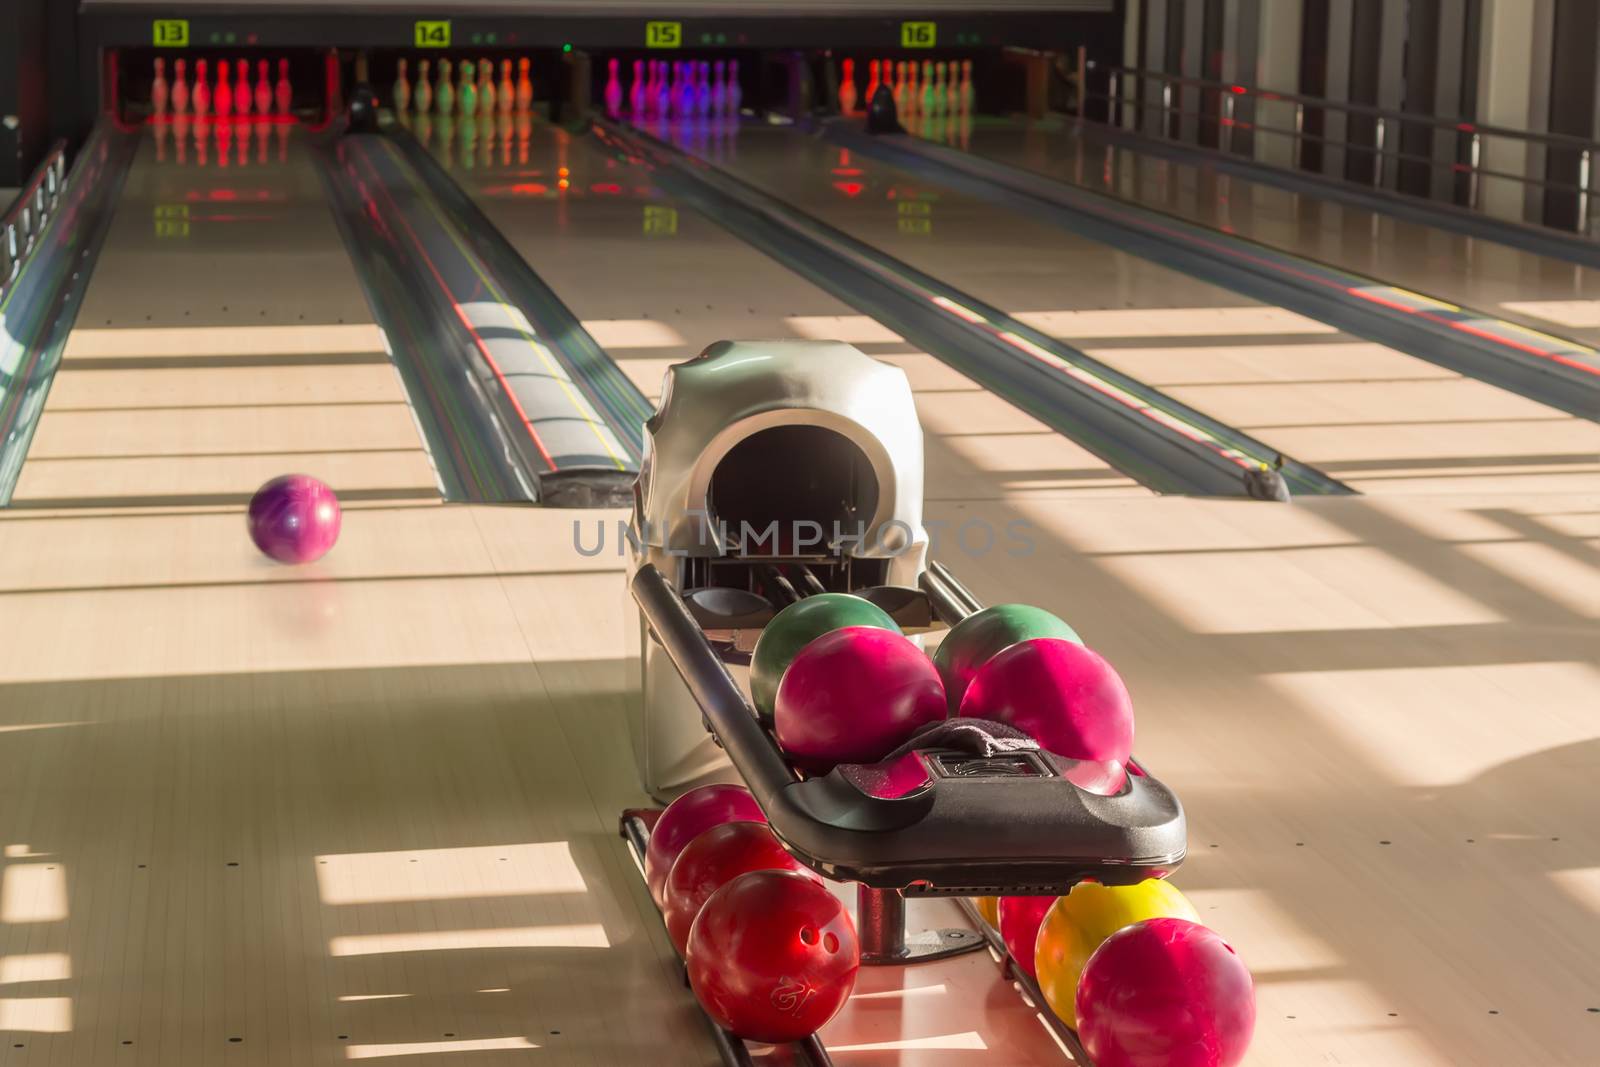 Playing area with several lanes with bowling pins, bowling ball rolling along the lane and colored bowling balls on the foreground in the modern pin bowling alley
